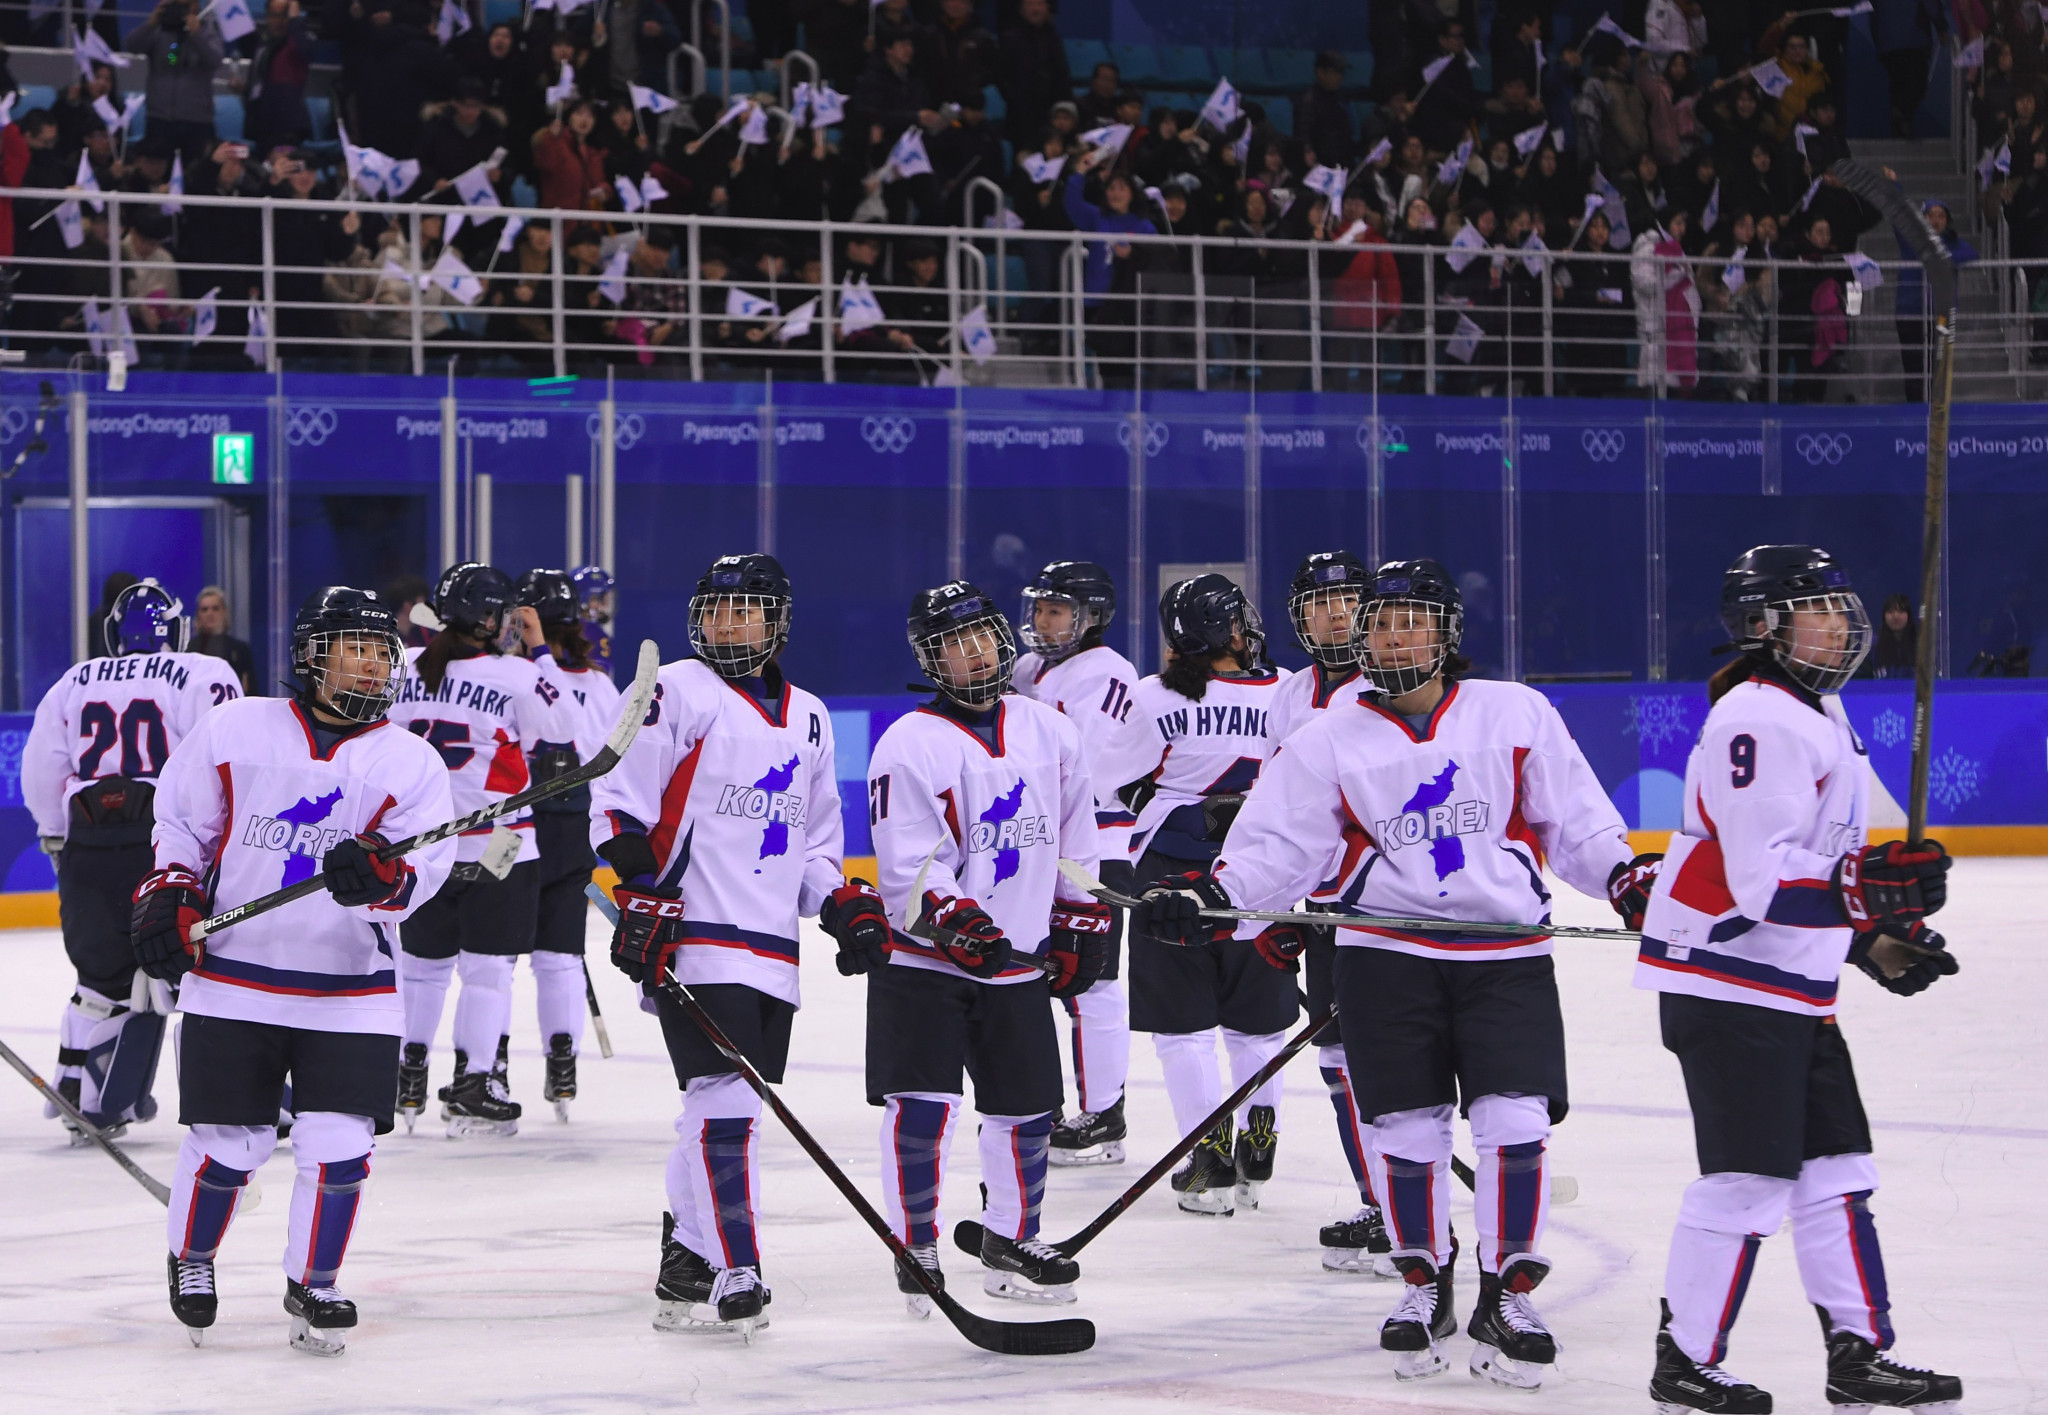 North and South Korea have already come together to form a joint team this year, in the women's ice hockey at Pyeognchang 2018 - an historic first for the Olympic Games ©Getty Images